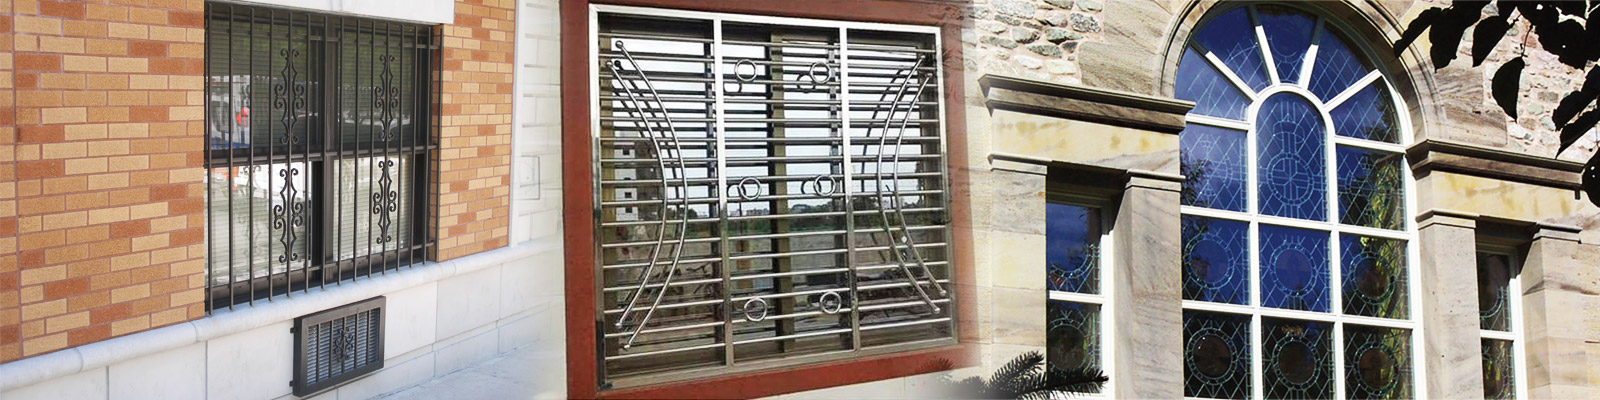 Iron Window Manufacturer for Home in Gurgaon, Steel Window Manufacturer for Home in Gurgaon, Stainless Steel Window Manufacturer of House in Gurgaon, Iron Window Manufacturer of House in Gurgaon, Domestic Gate for Home of Iron & Steel in Gurgaon